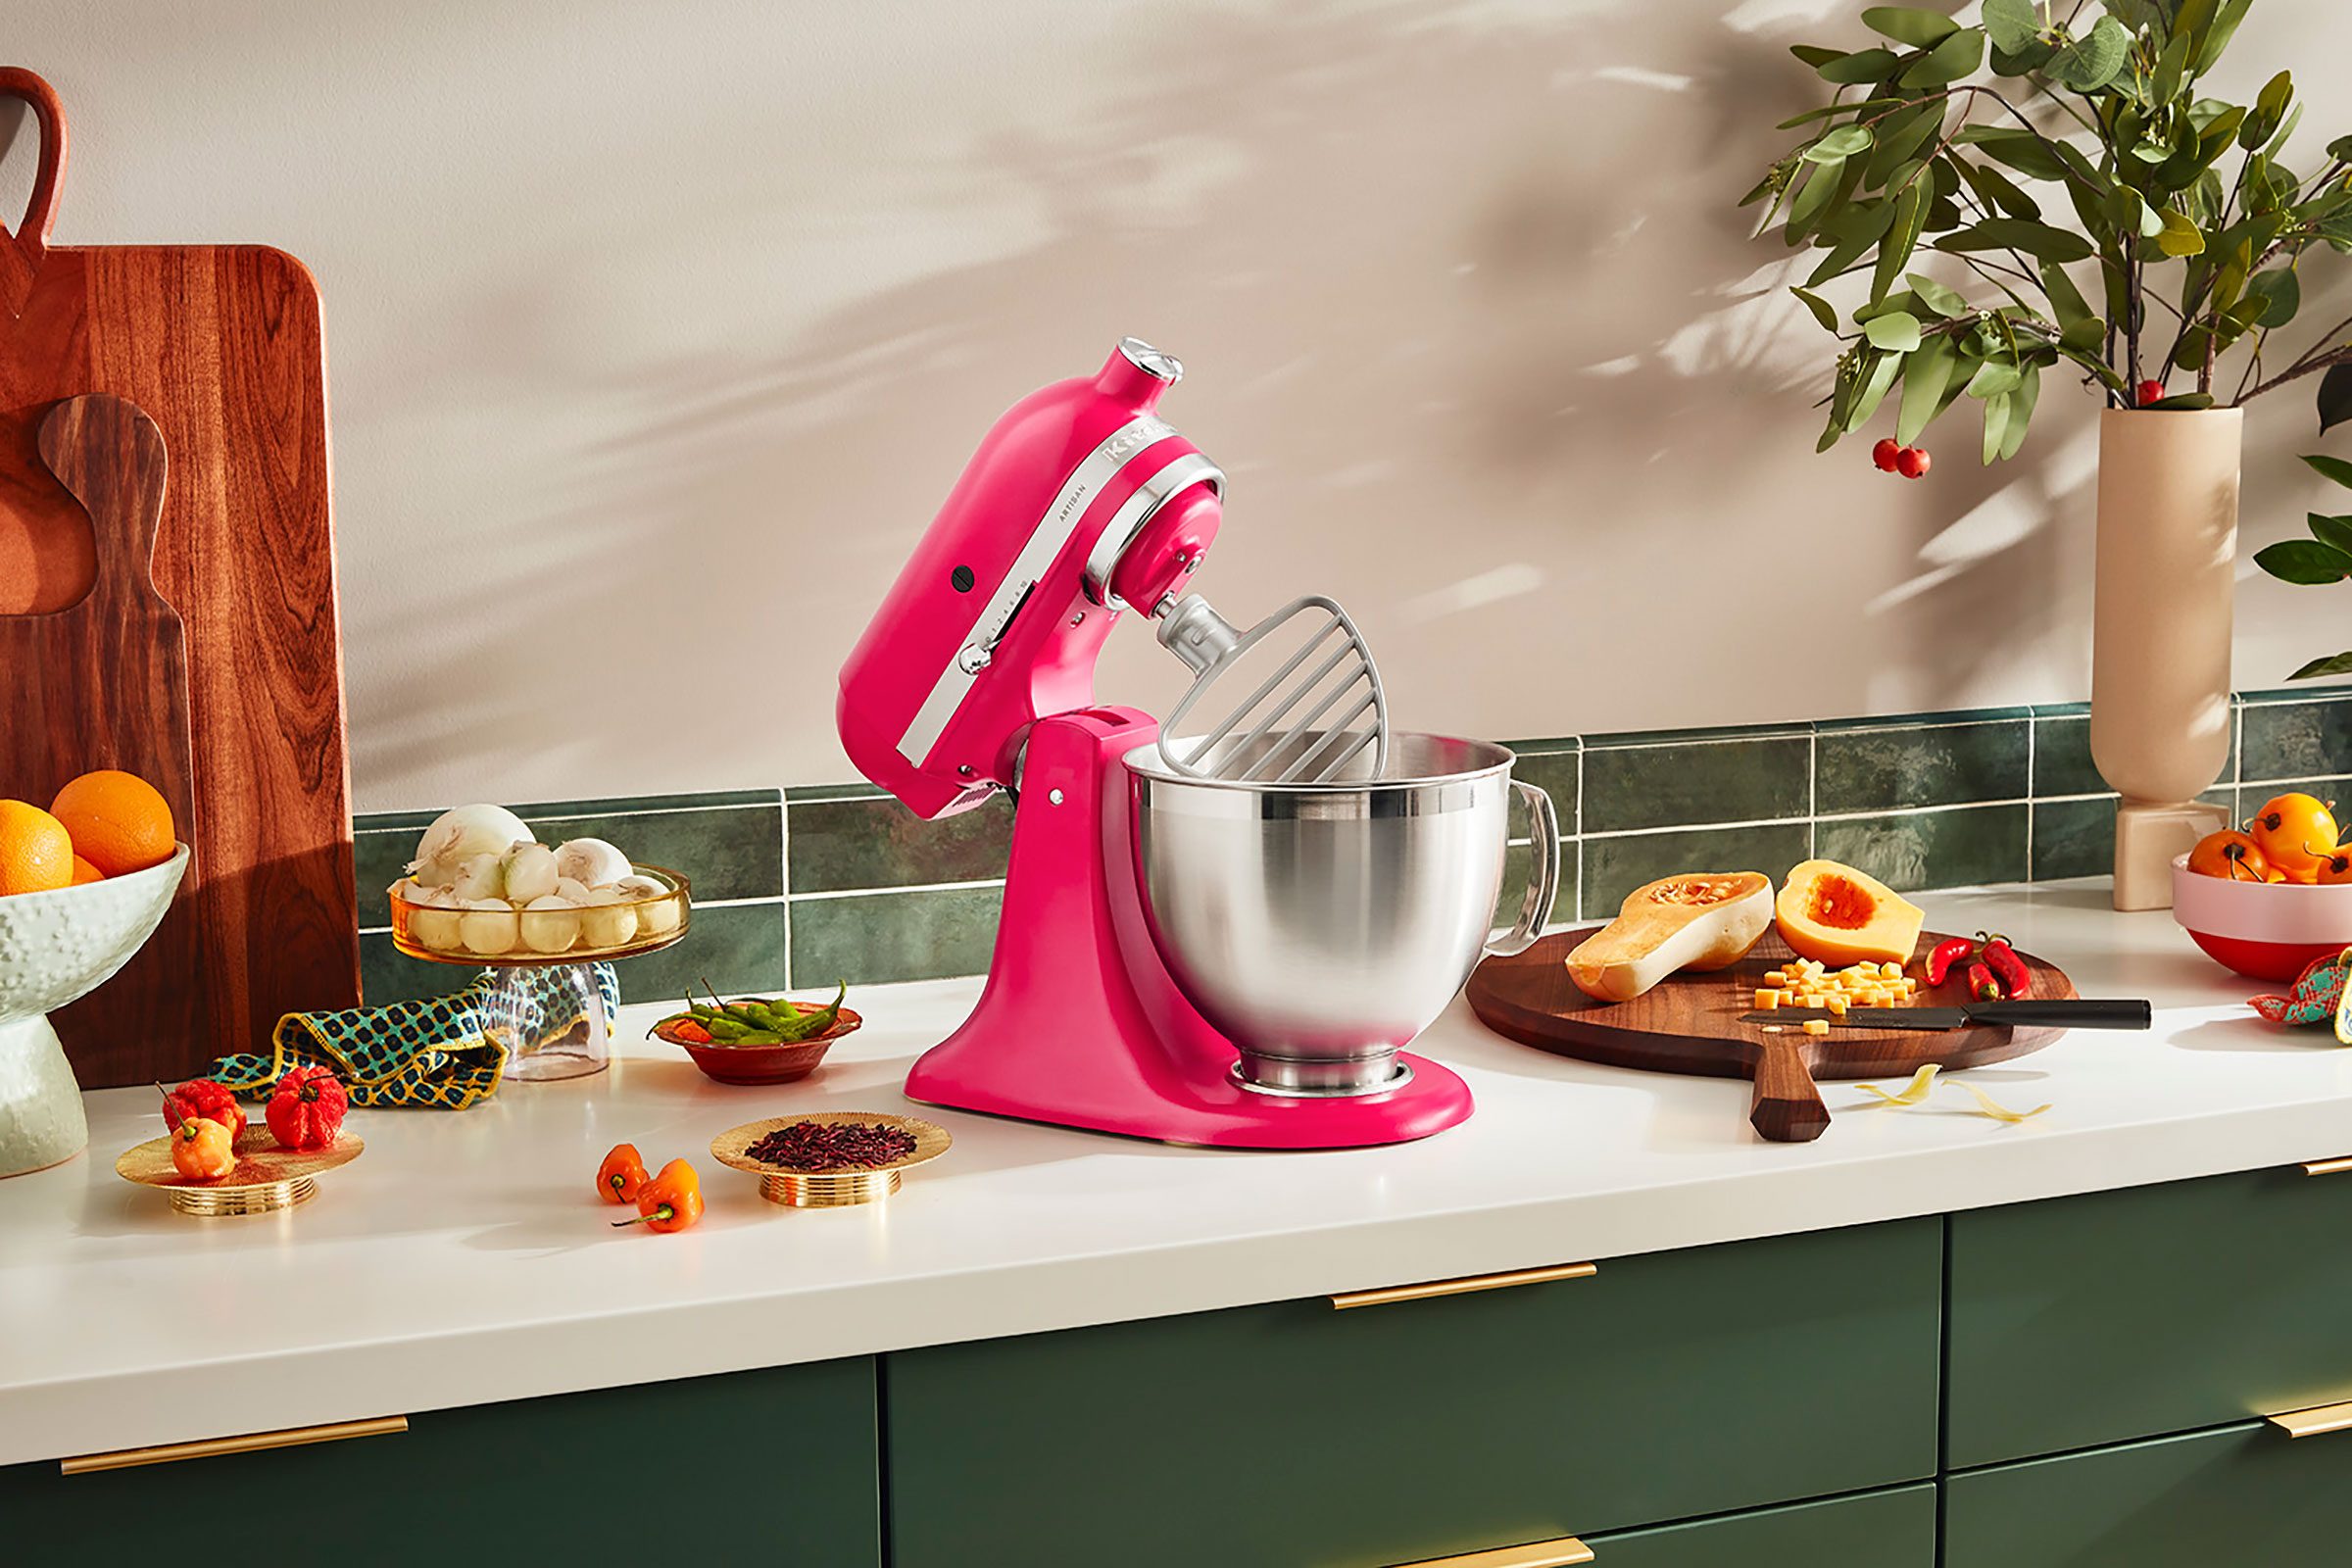 https://www.tasteofhome.com/wp-content/uploads/2022/02/Kitchen-Aid-Color-of-the-Year-2023-Hibiscus-Mixer-Resize-Crop-Courtesy-Kitchen-Aid.jpg